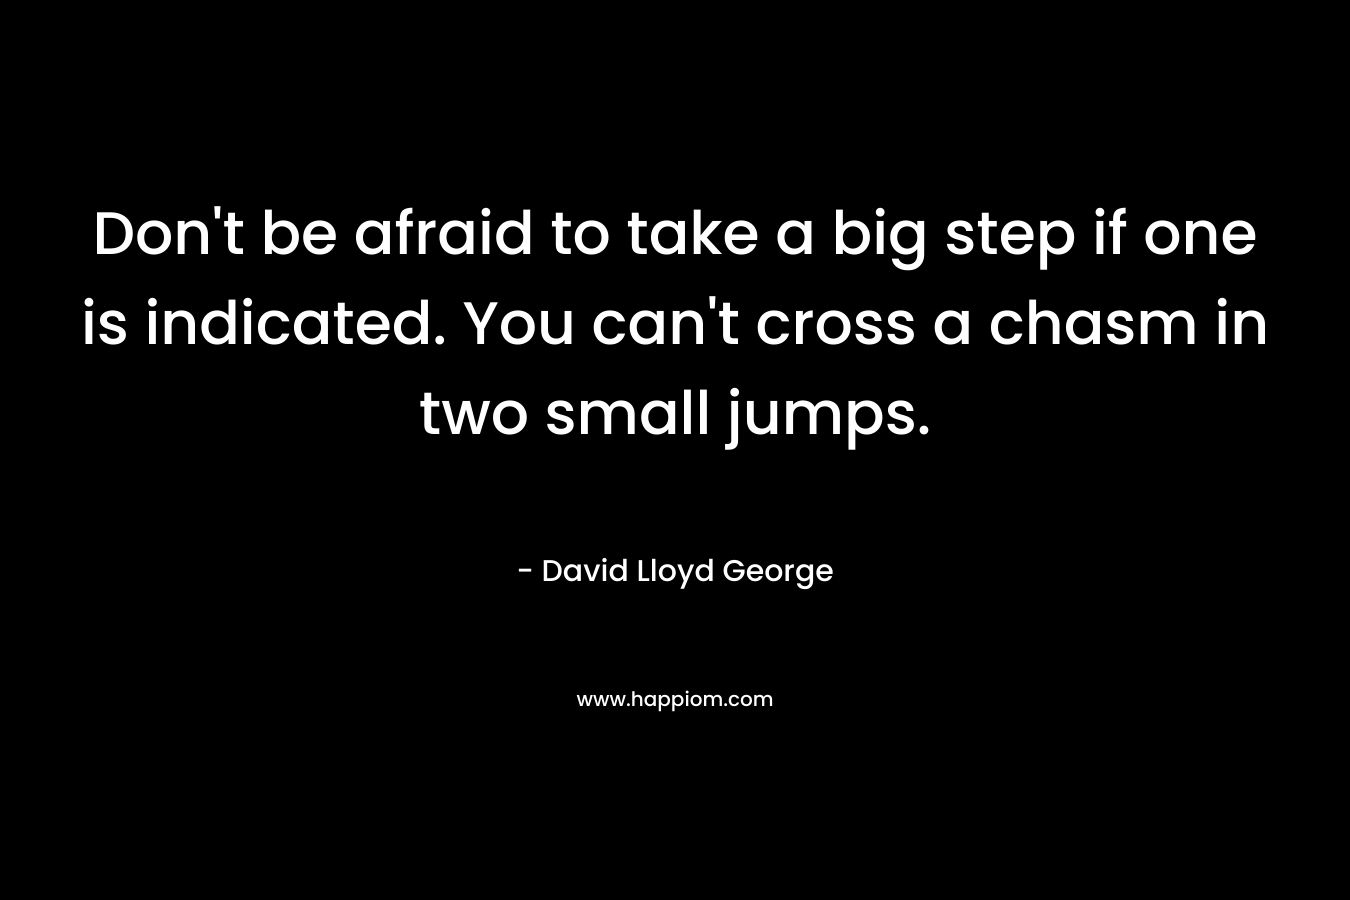 Don’t be afraid to take a big step if one is indicated. You can’t cross a chasm in two small jumps. – David Lloyd George